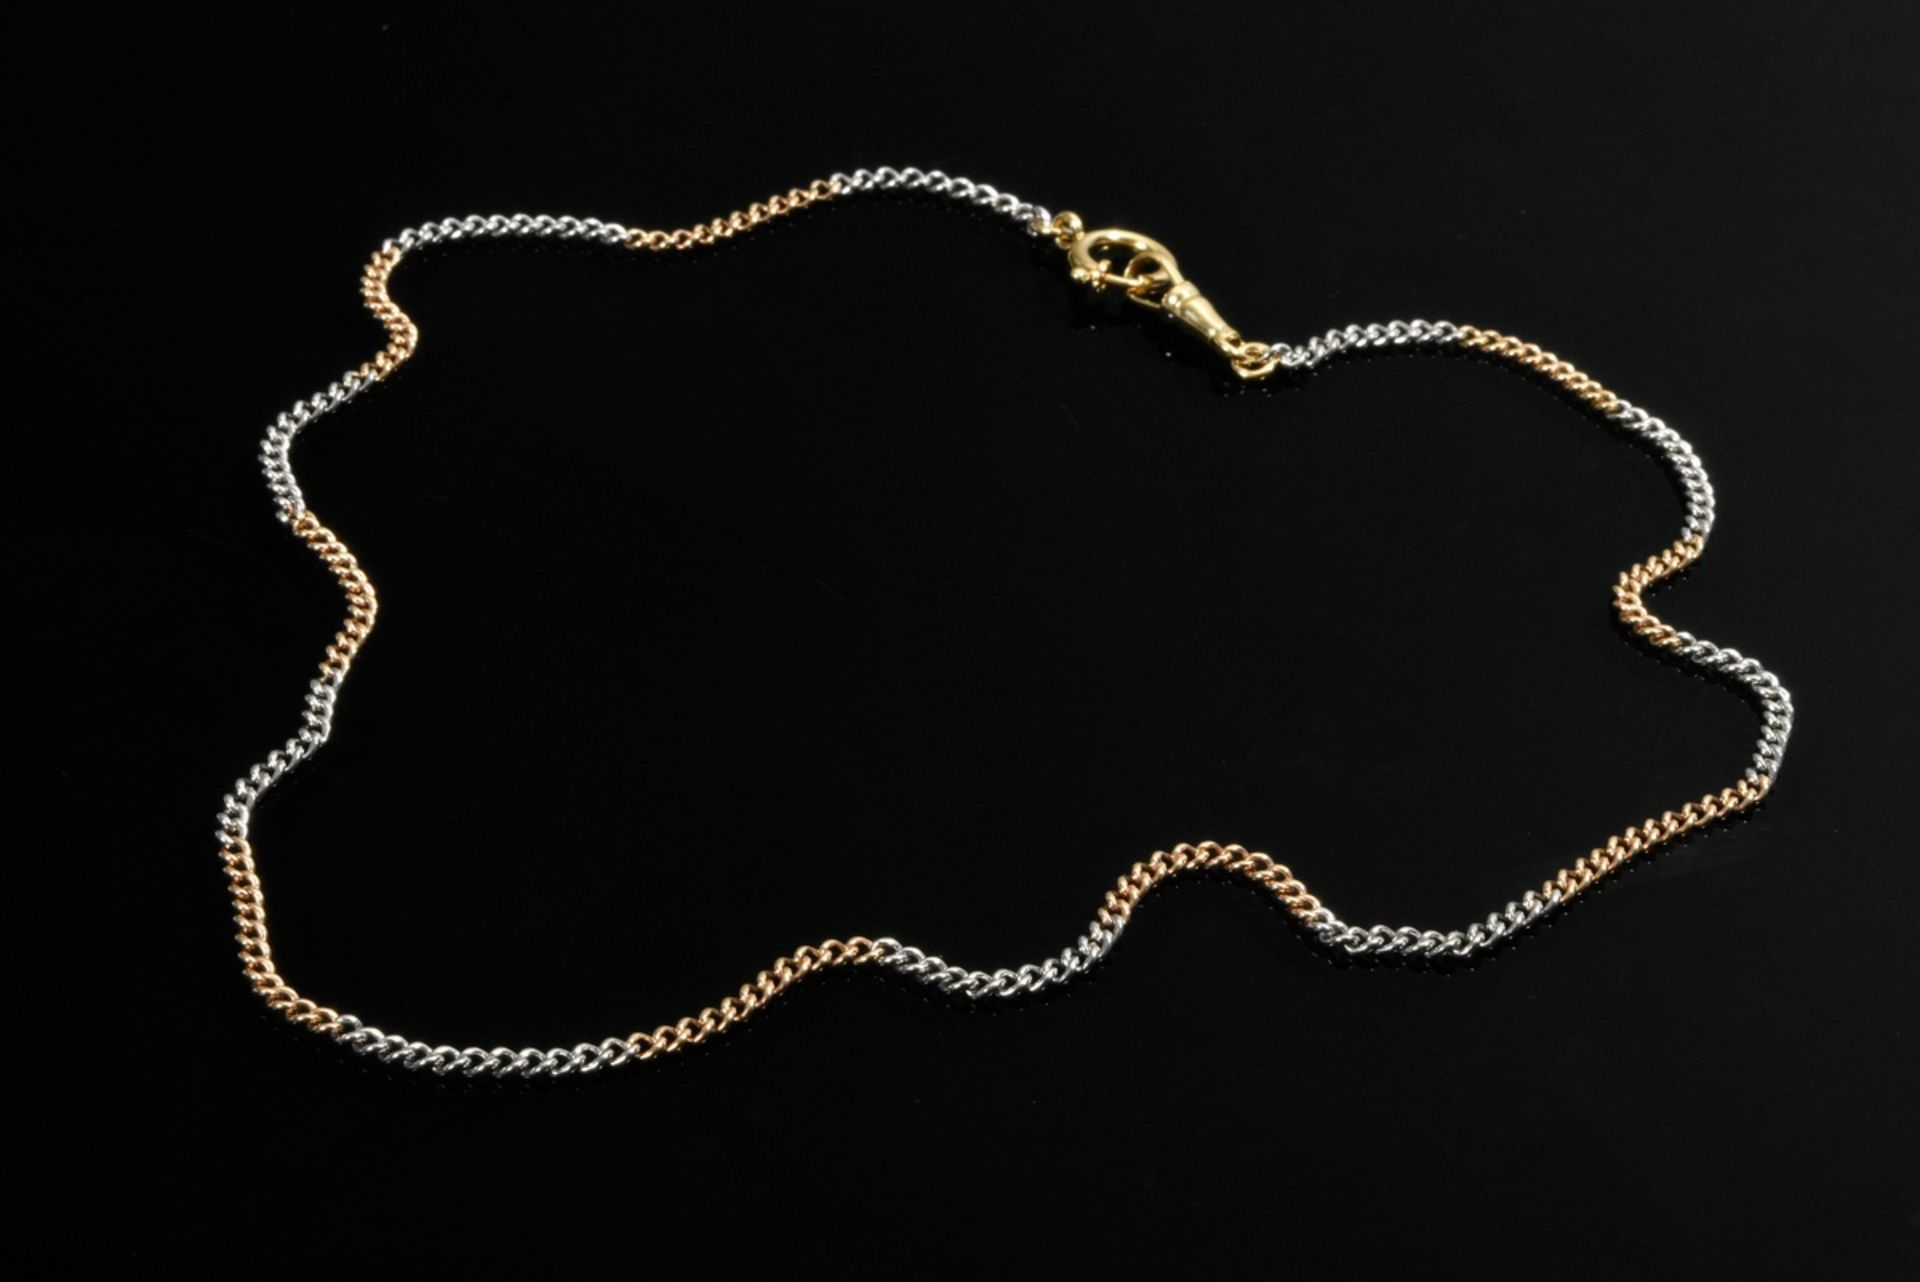 Bicolor white and yellow gold 750 round curb necklace with spring ring, 20.7g, l. 54.5cm